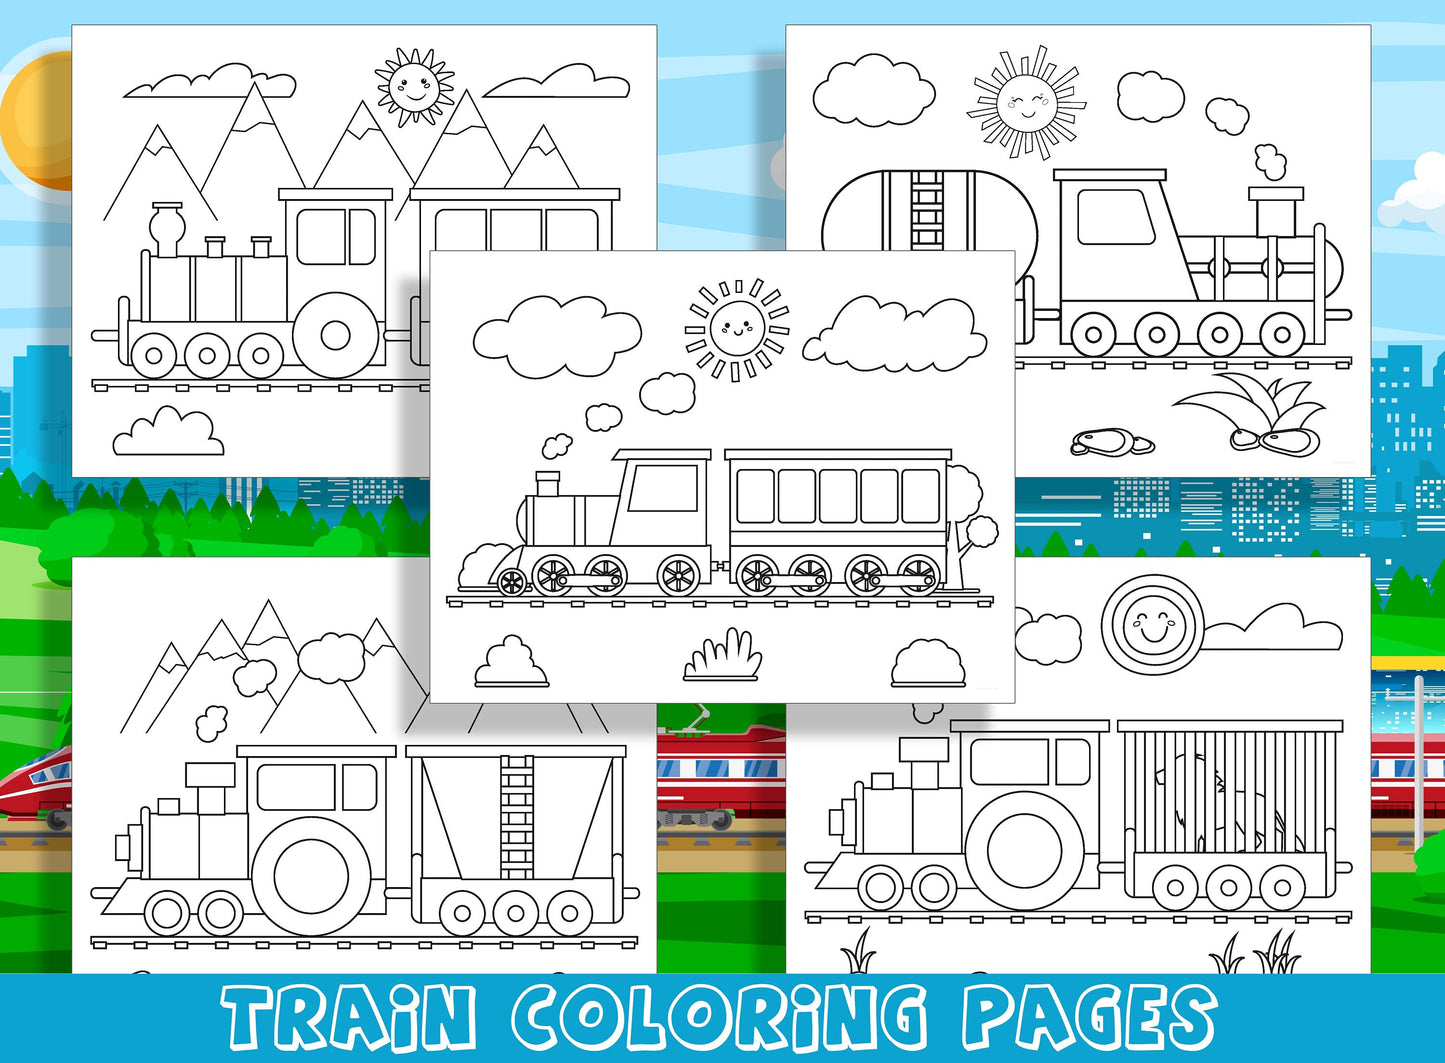 Choo Choo! All Aboard the Fun Train Coloring Pages: Perfect for Preschool and Kindergarten (15 Pages), PDF File, Instant Download